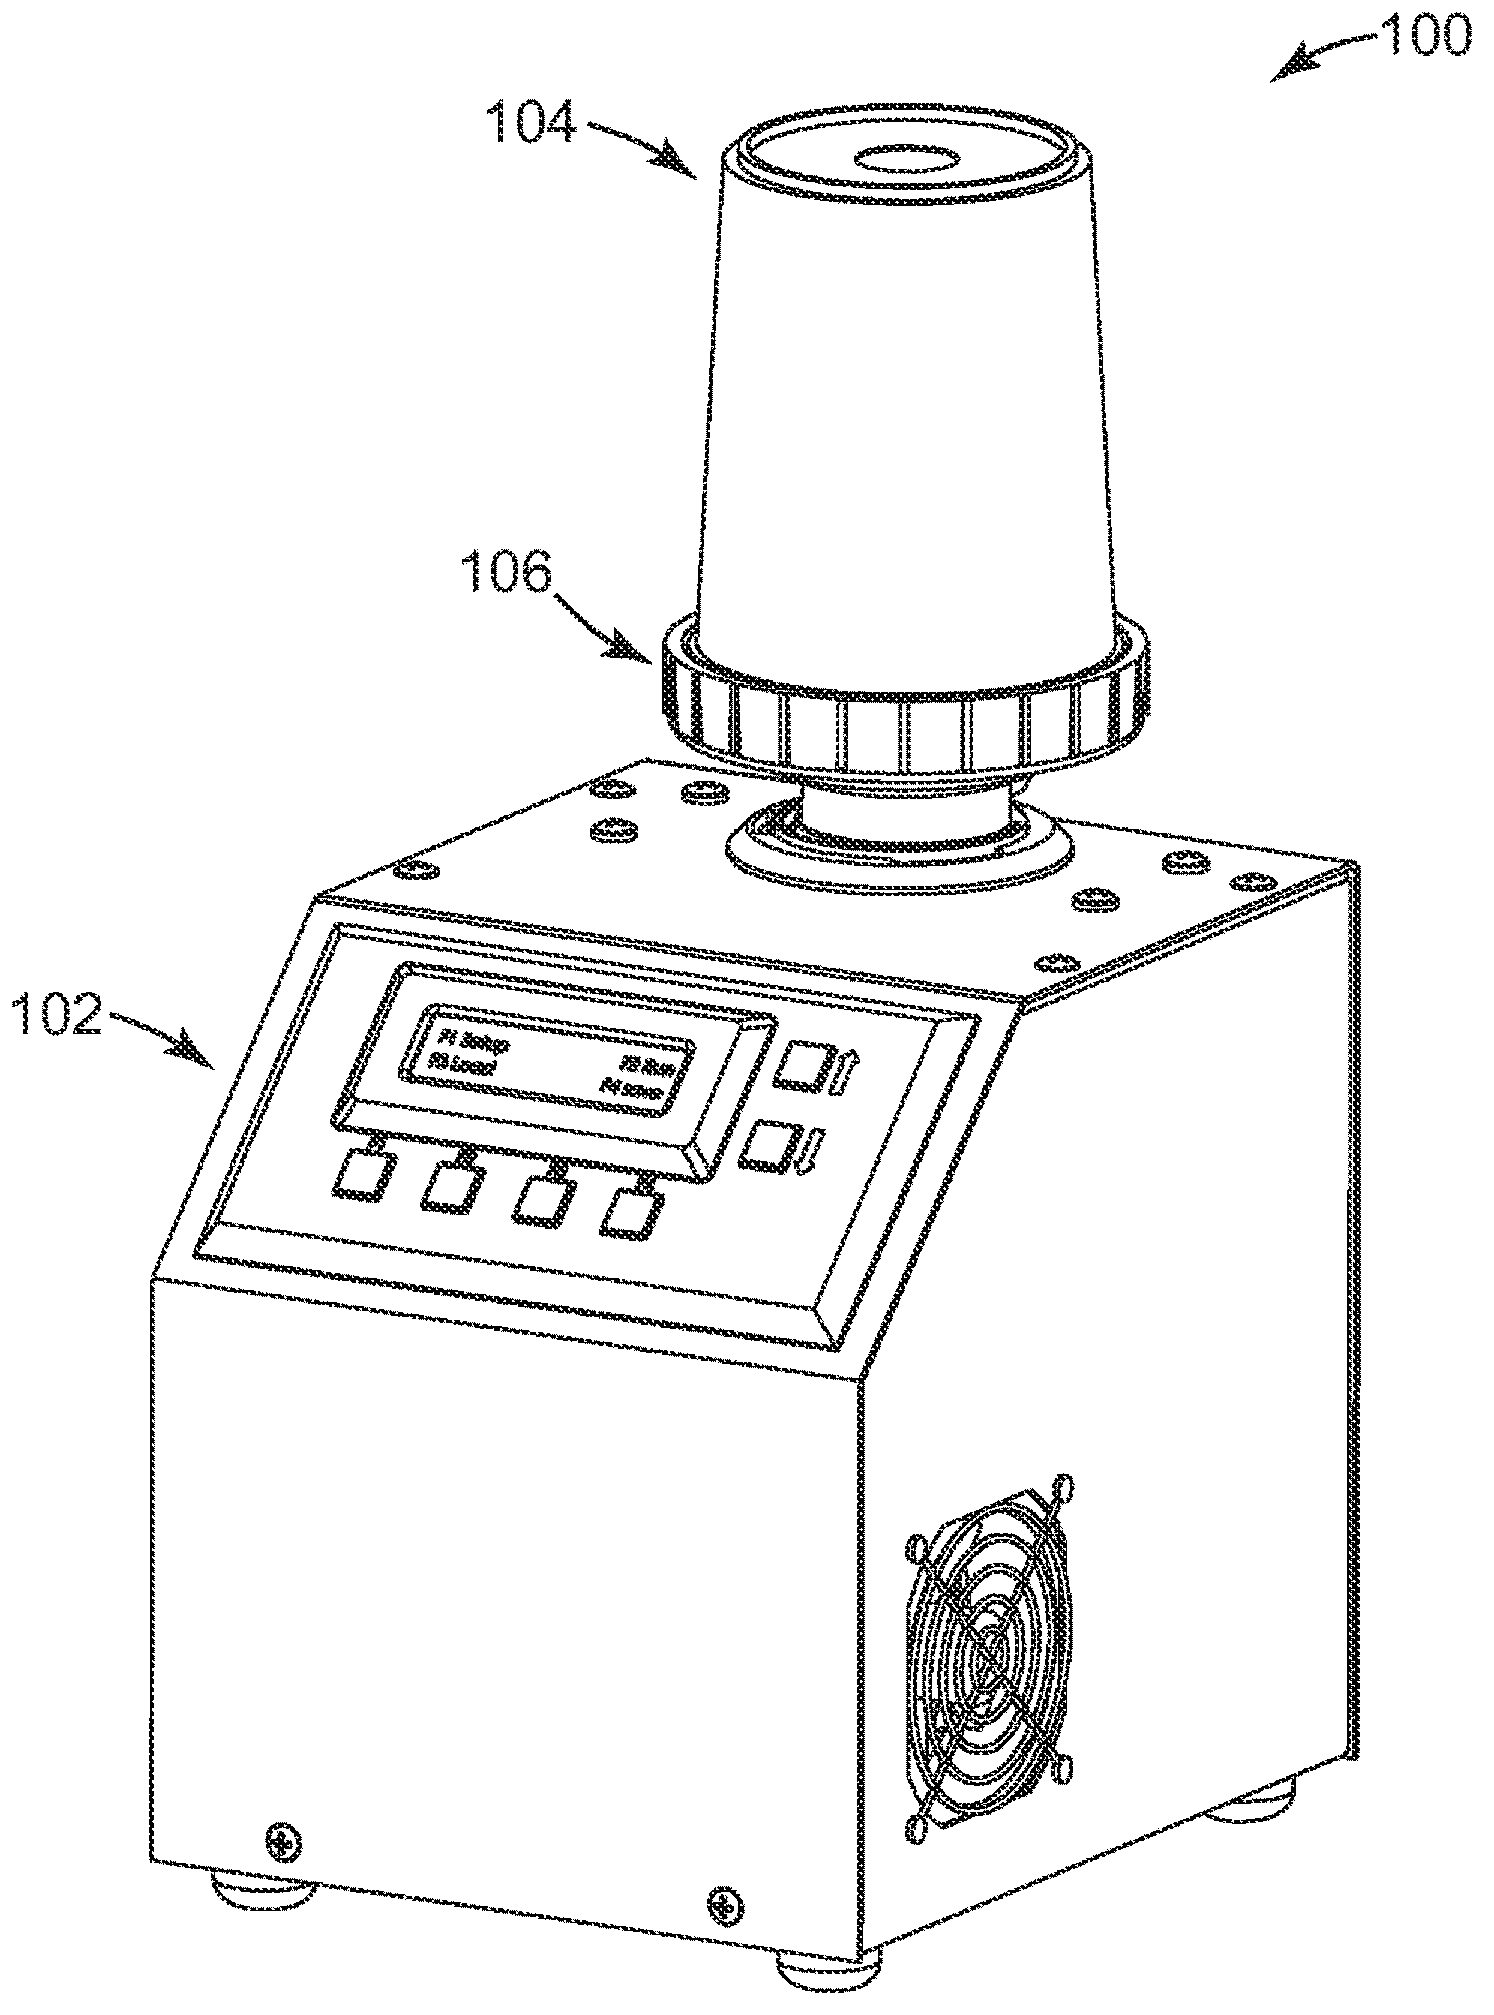 Dispensing liquids from a container coupled to an integrated pump cap